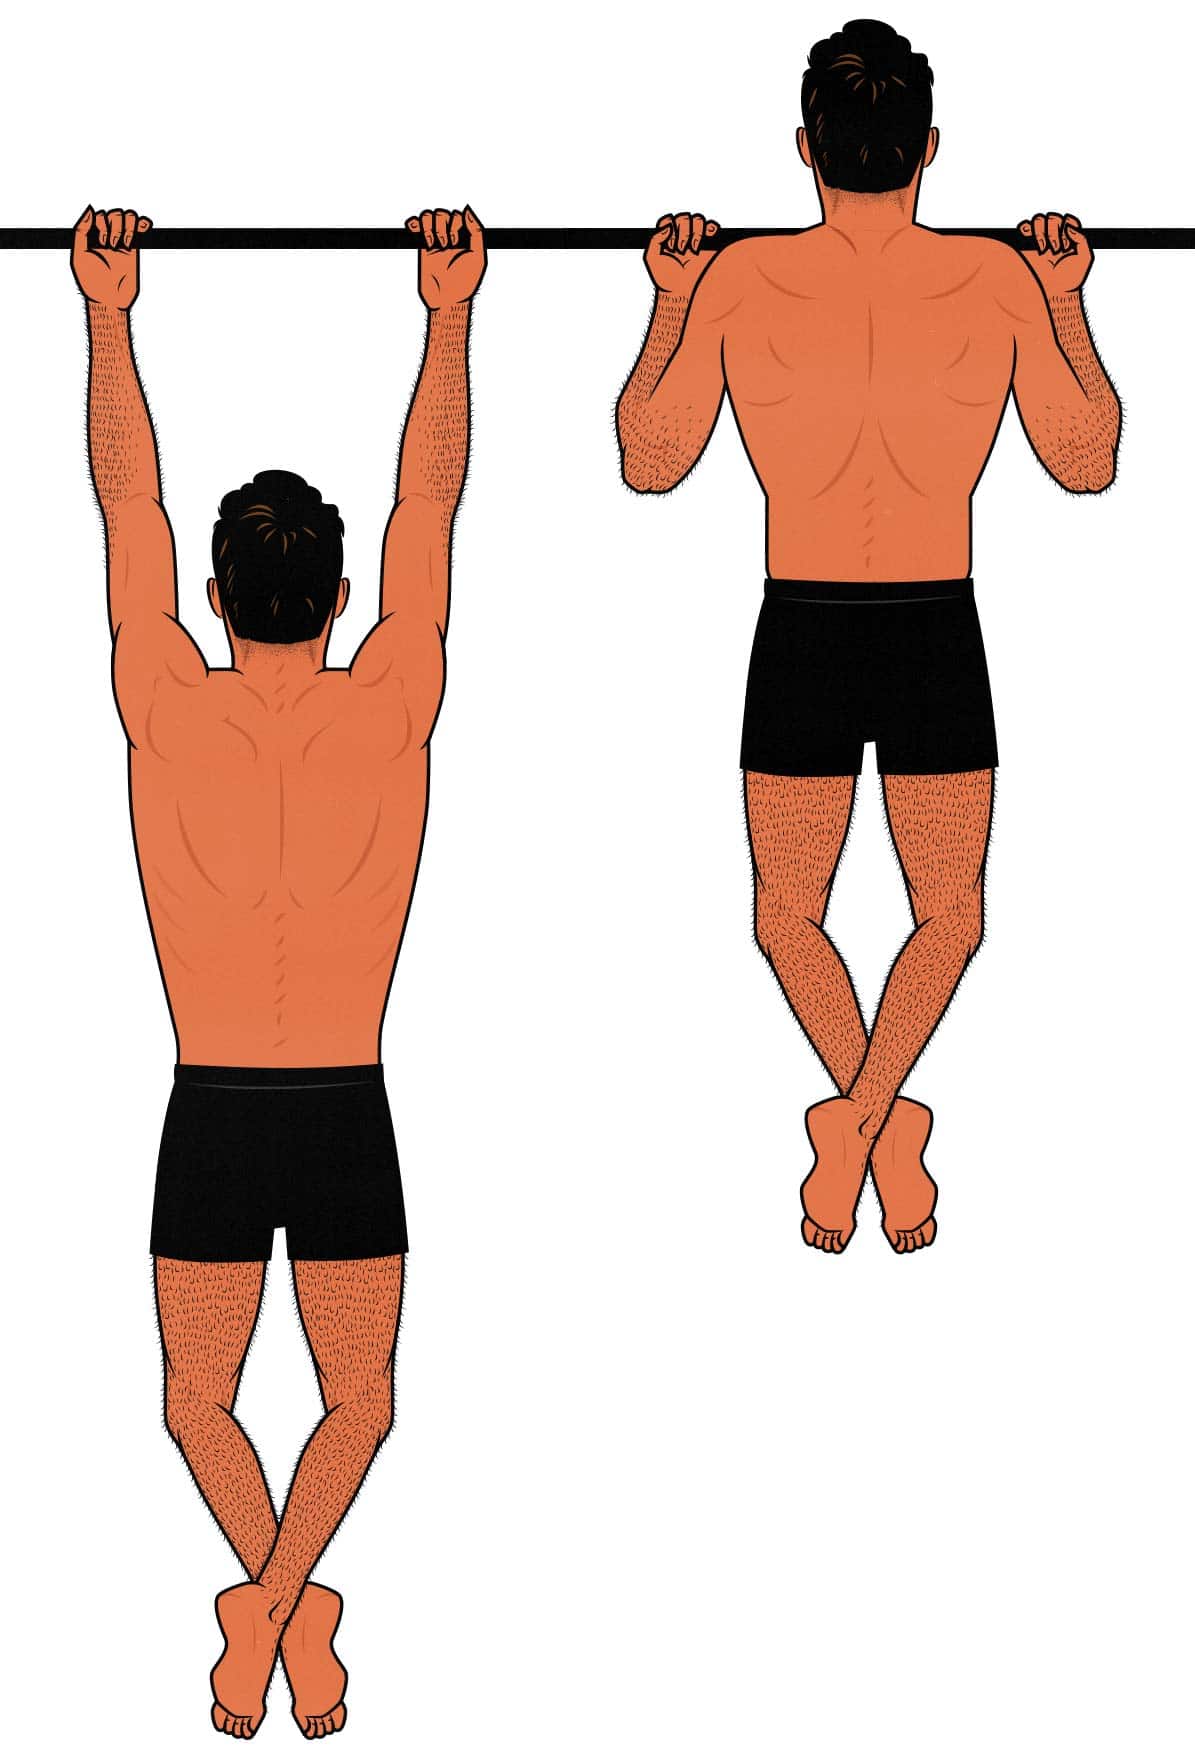 Illustration of a skinny ectomorph doing an underhand chin-up.